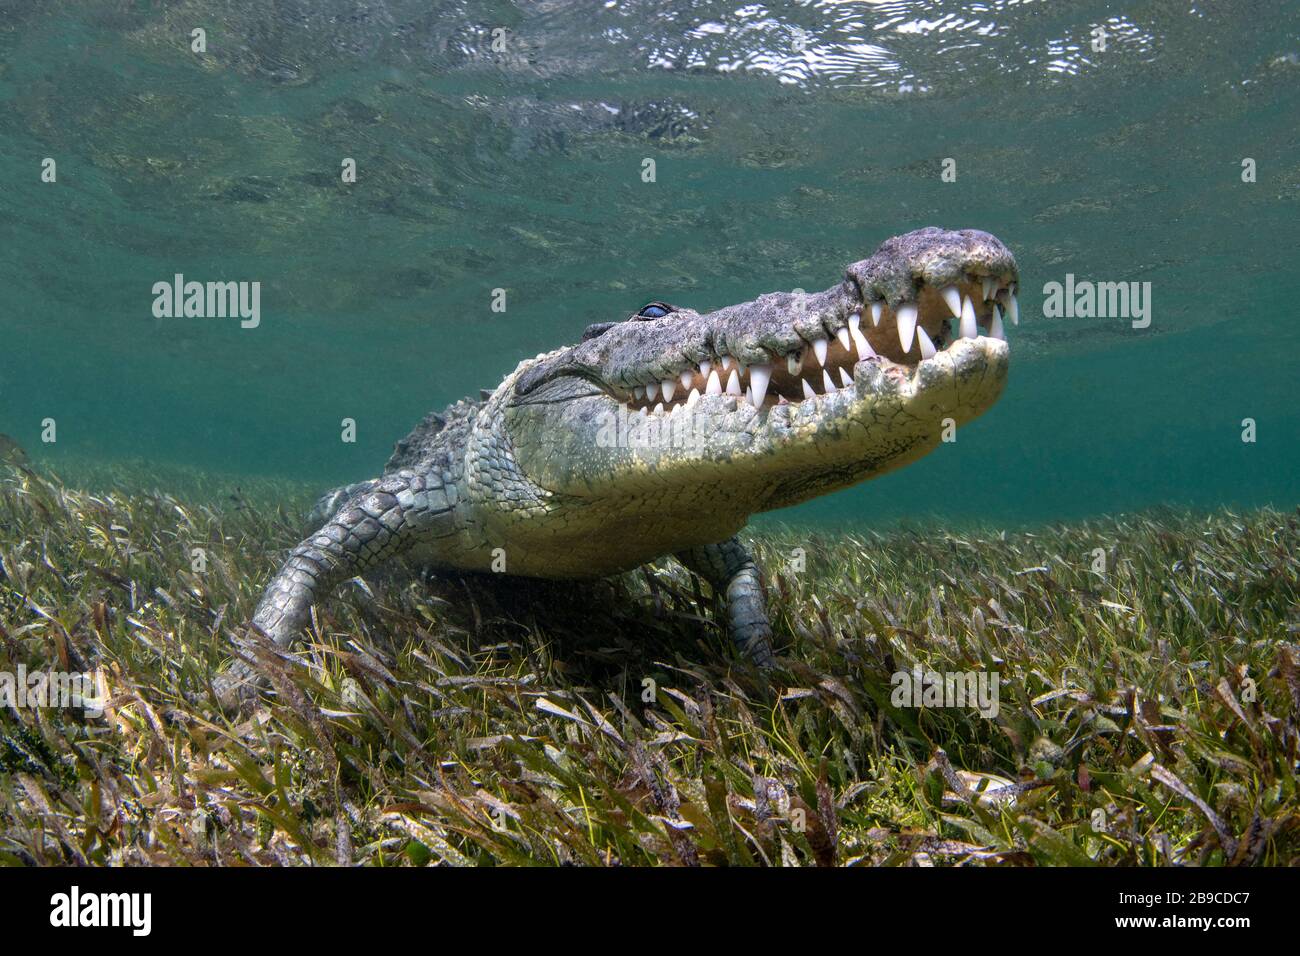 A crocodile resting on a bed of grass, Caribbean Sea, Mexico. Stock Photo